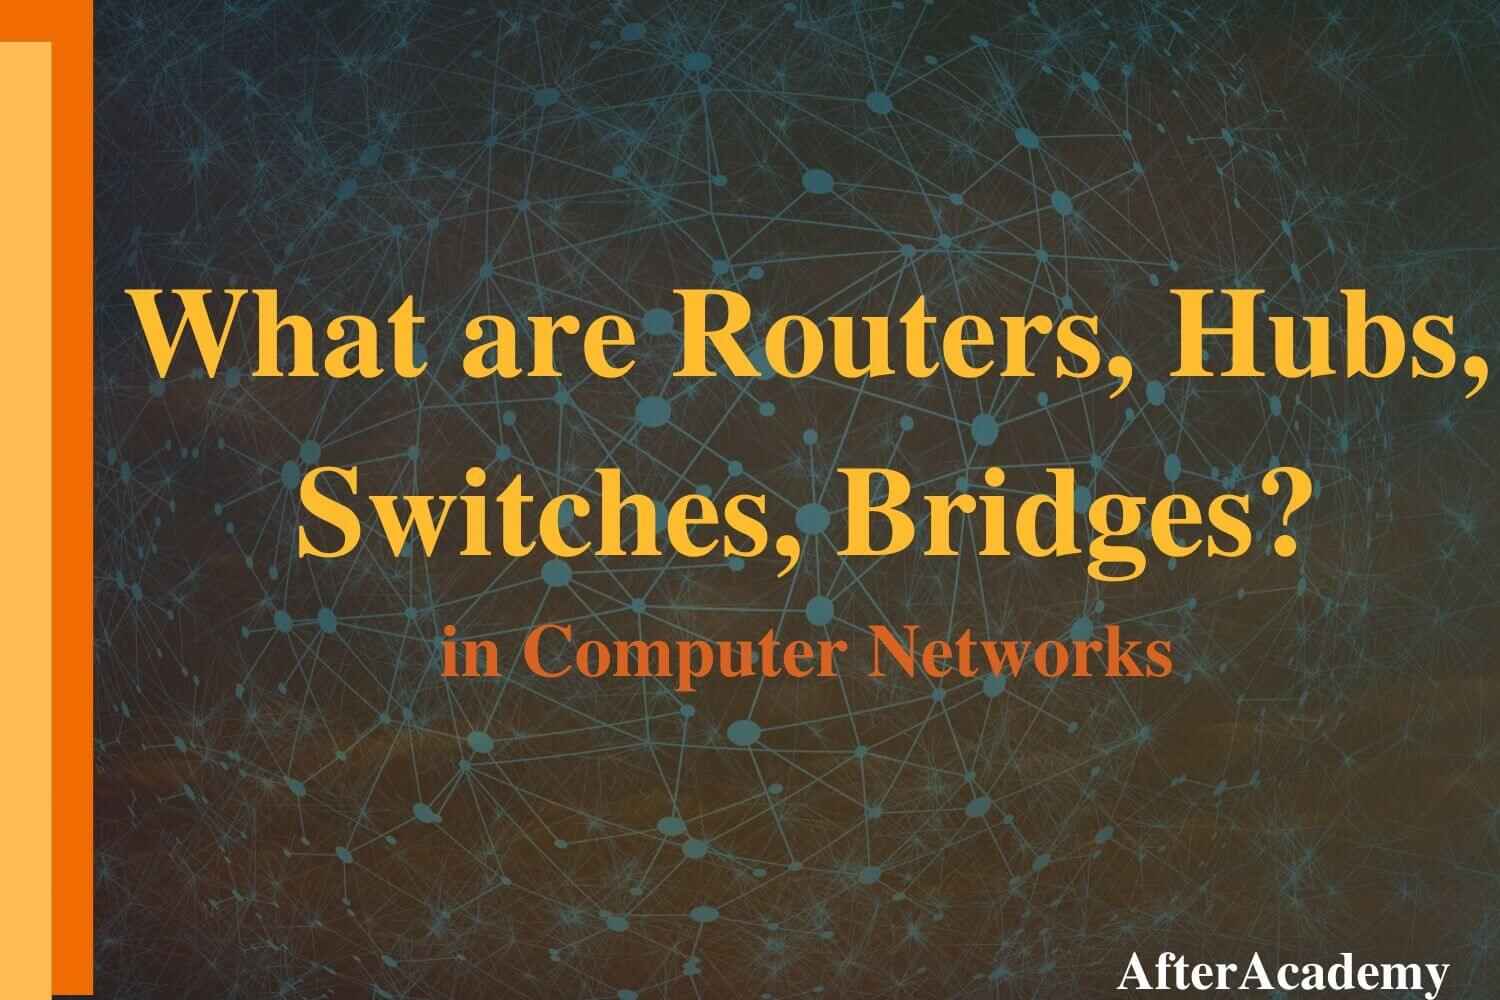 What are Routers, Hubs, Switches, Bridges?